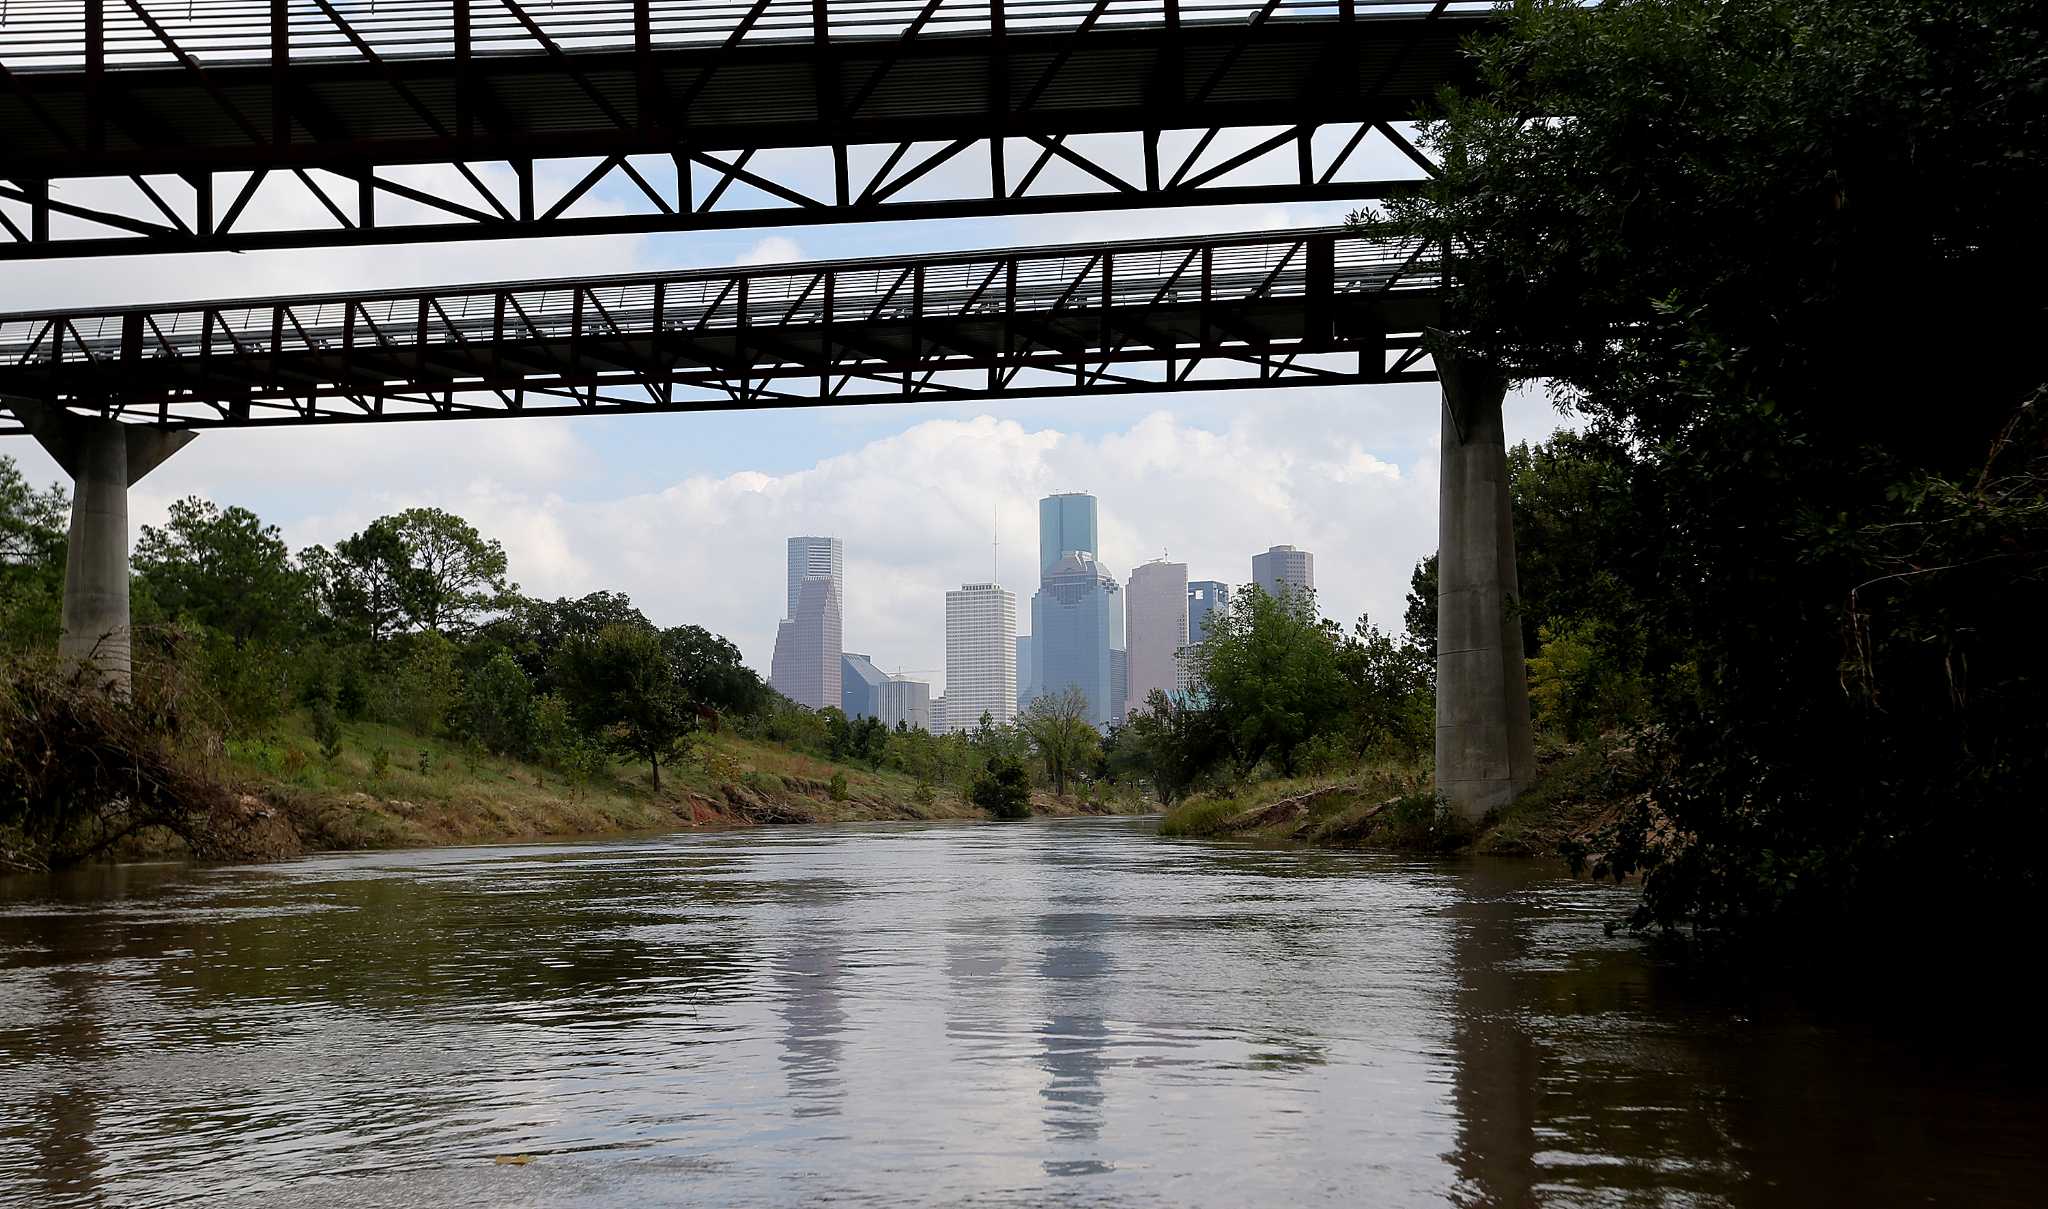 Texas companies are the biggest offenders for water pollution, study finds